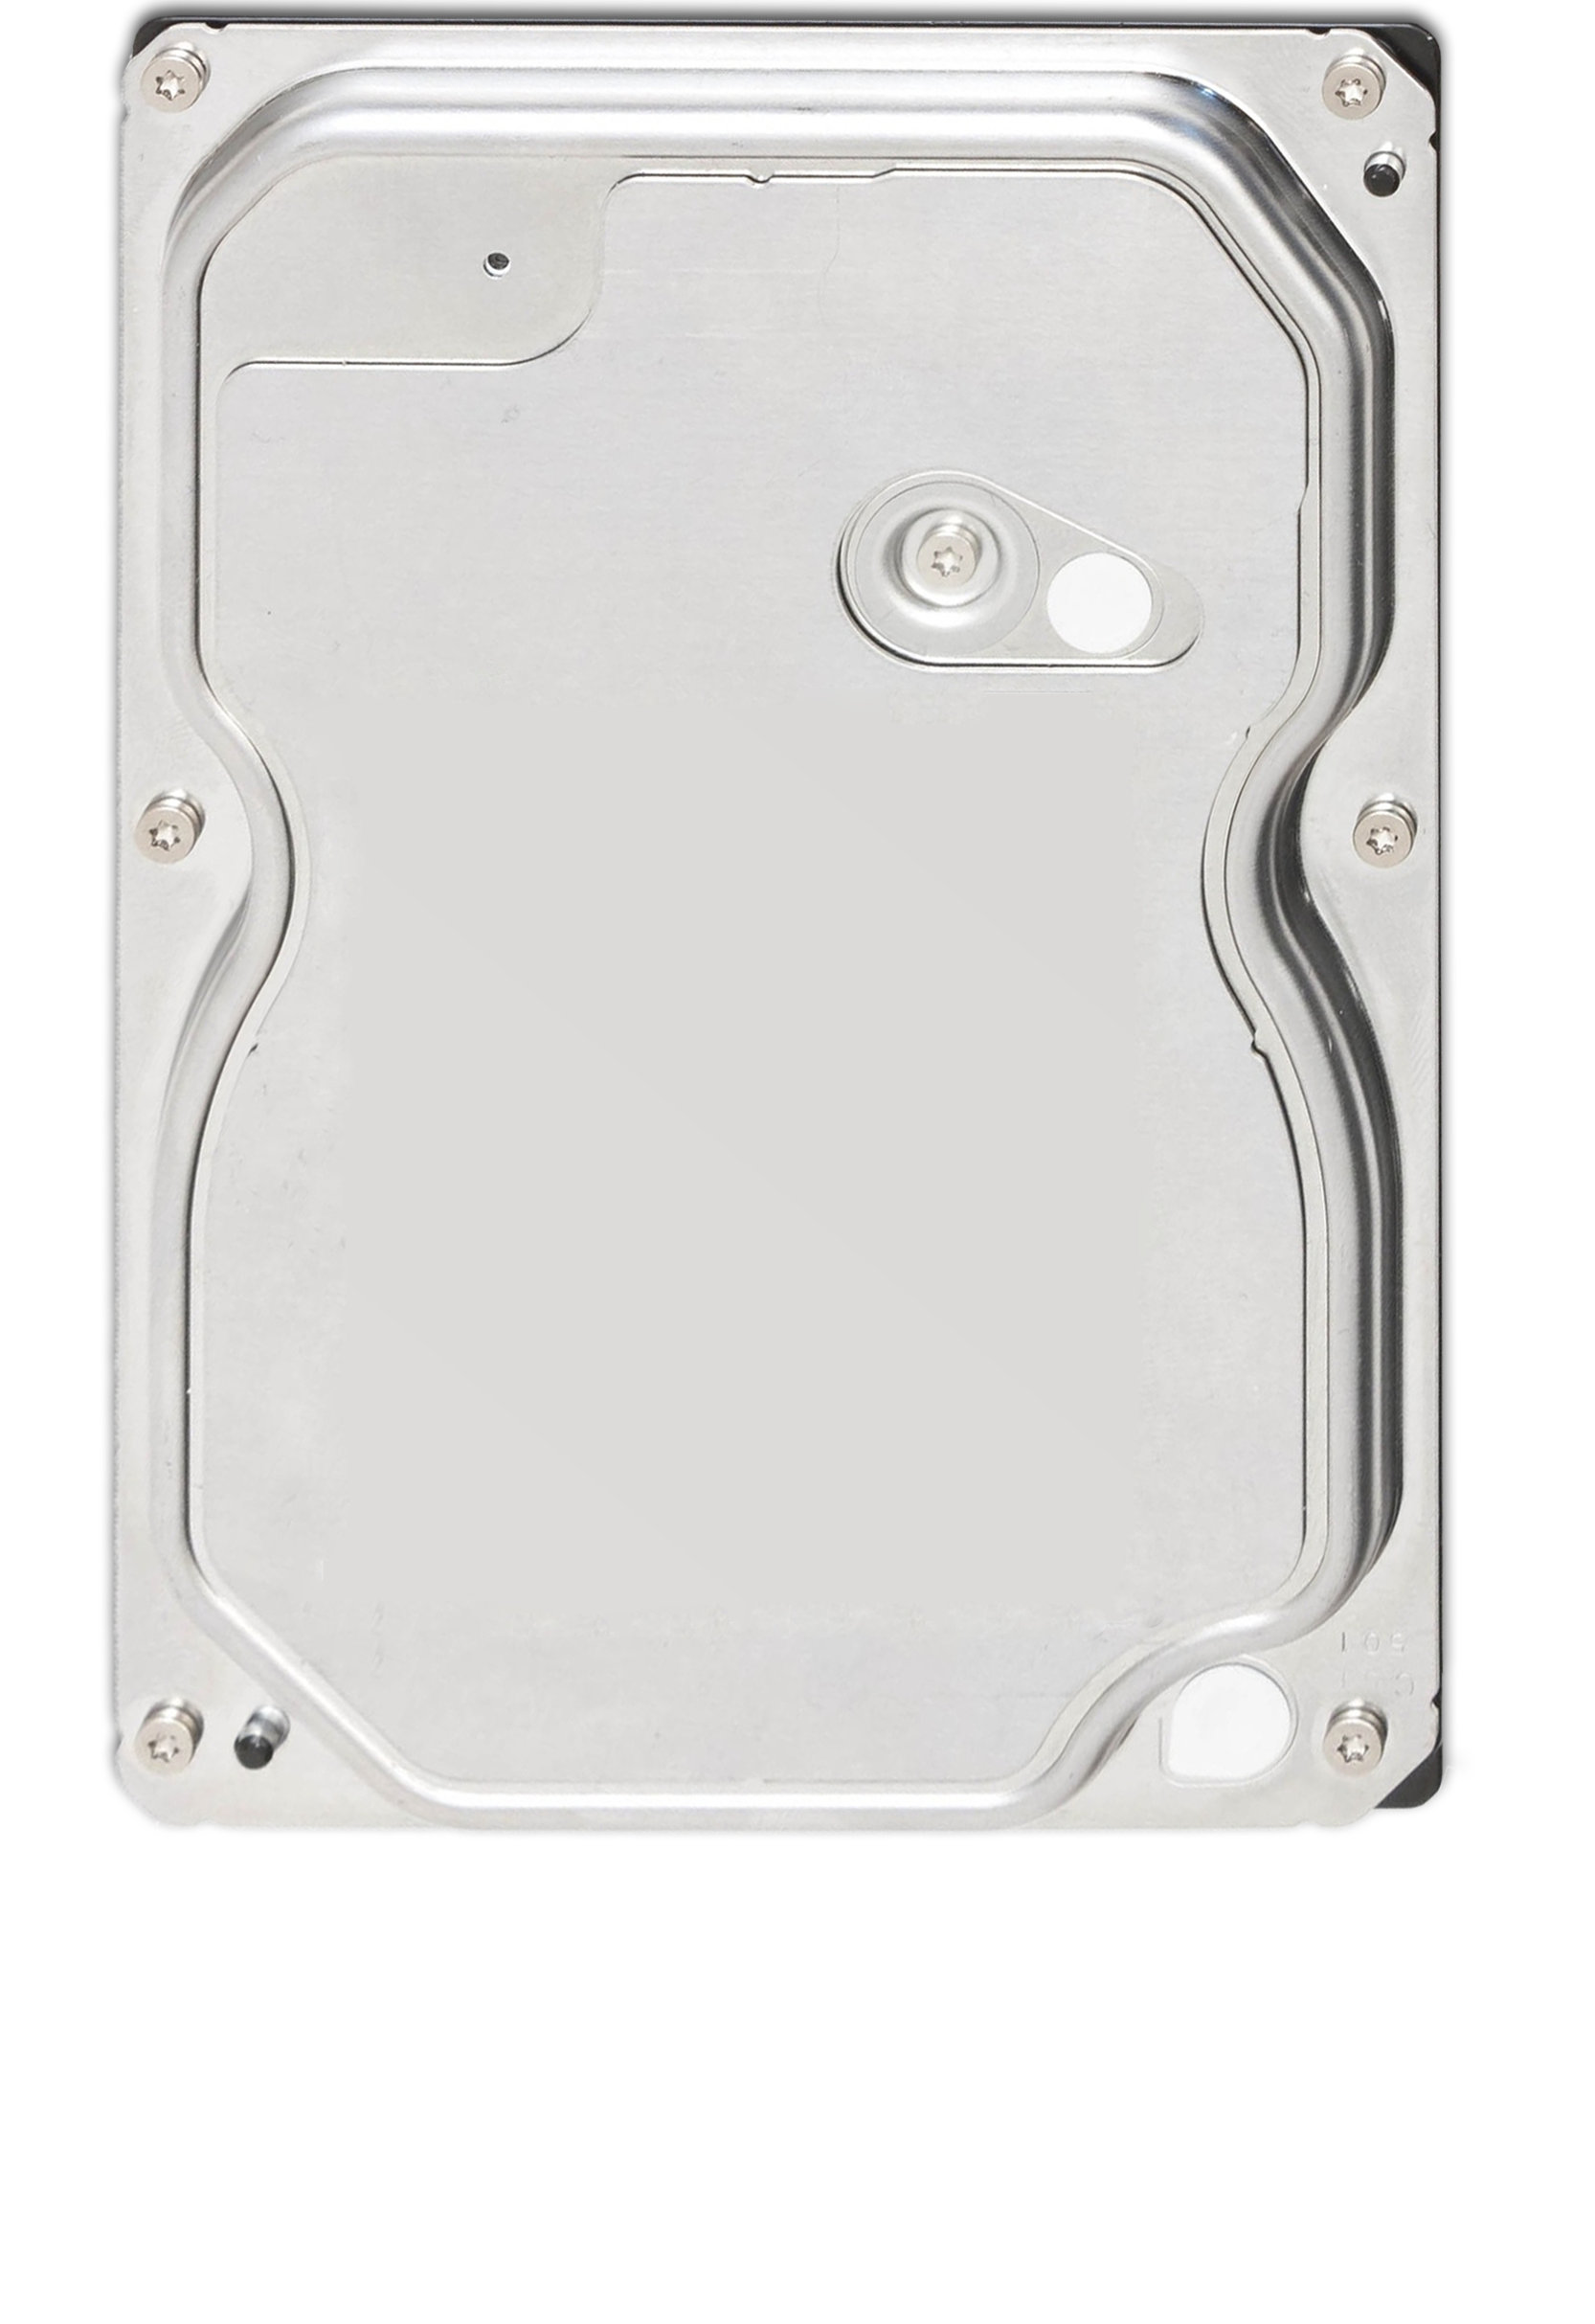 NA762TB3 drive tray support both 2.5 and 3.5 inches HDDs